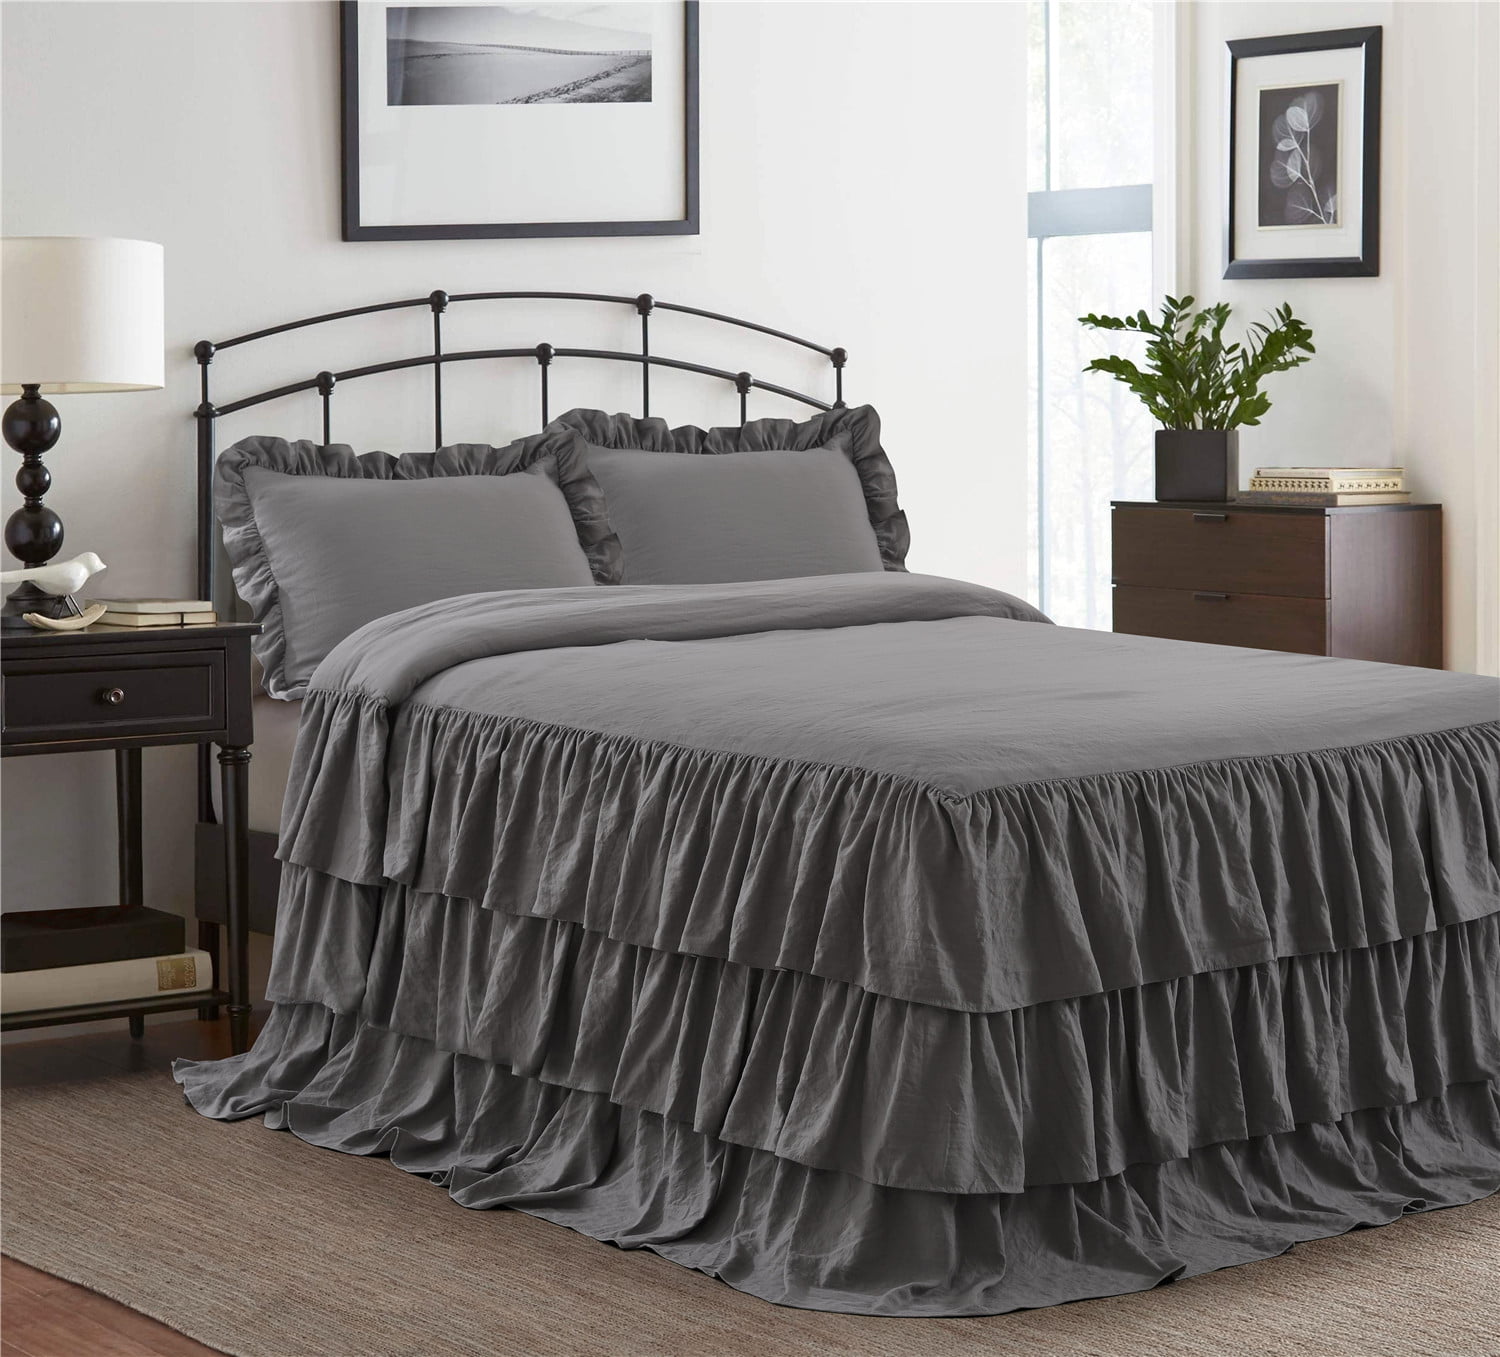 Hig 3 Piece Ruffle Skirt Bedspread Set, What Size Bedspread For King Size Bed